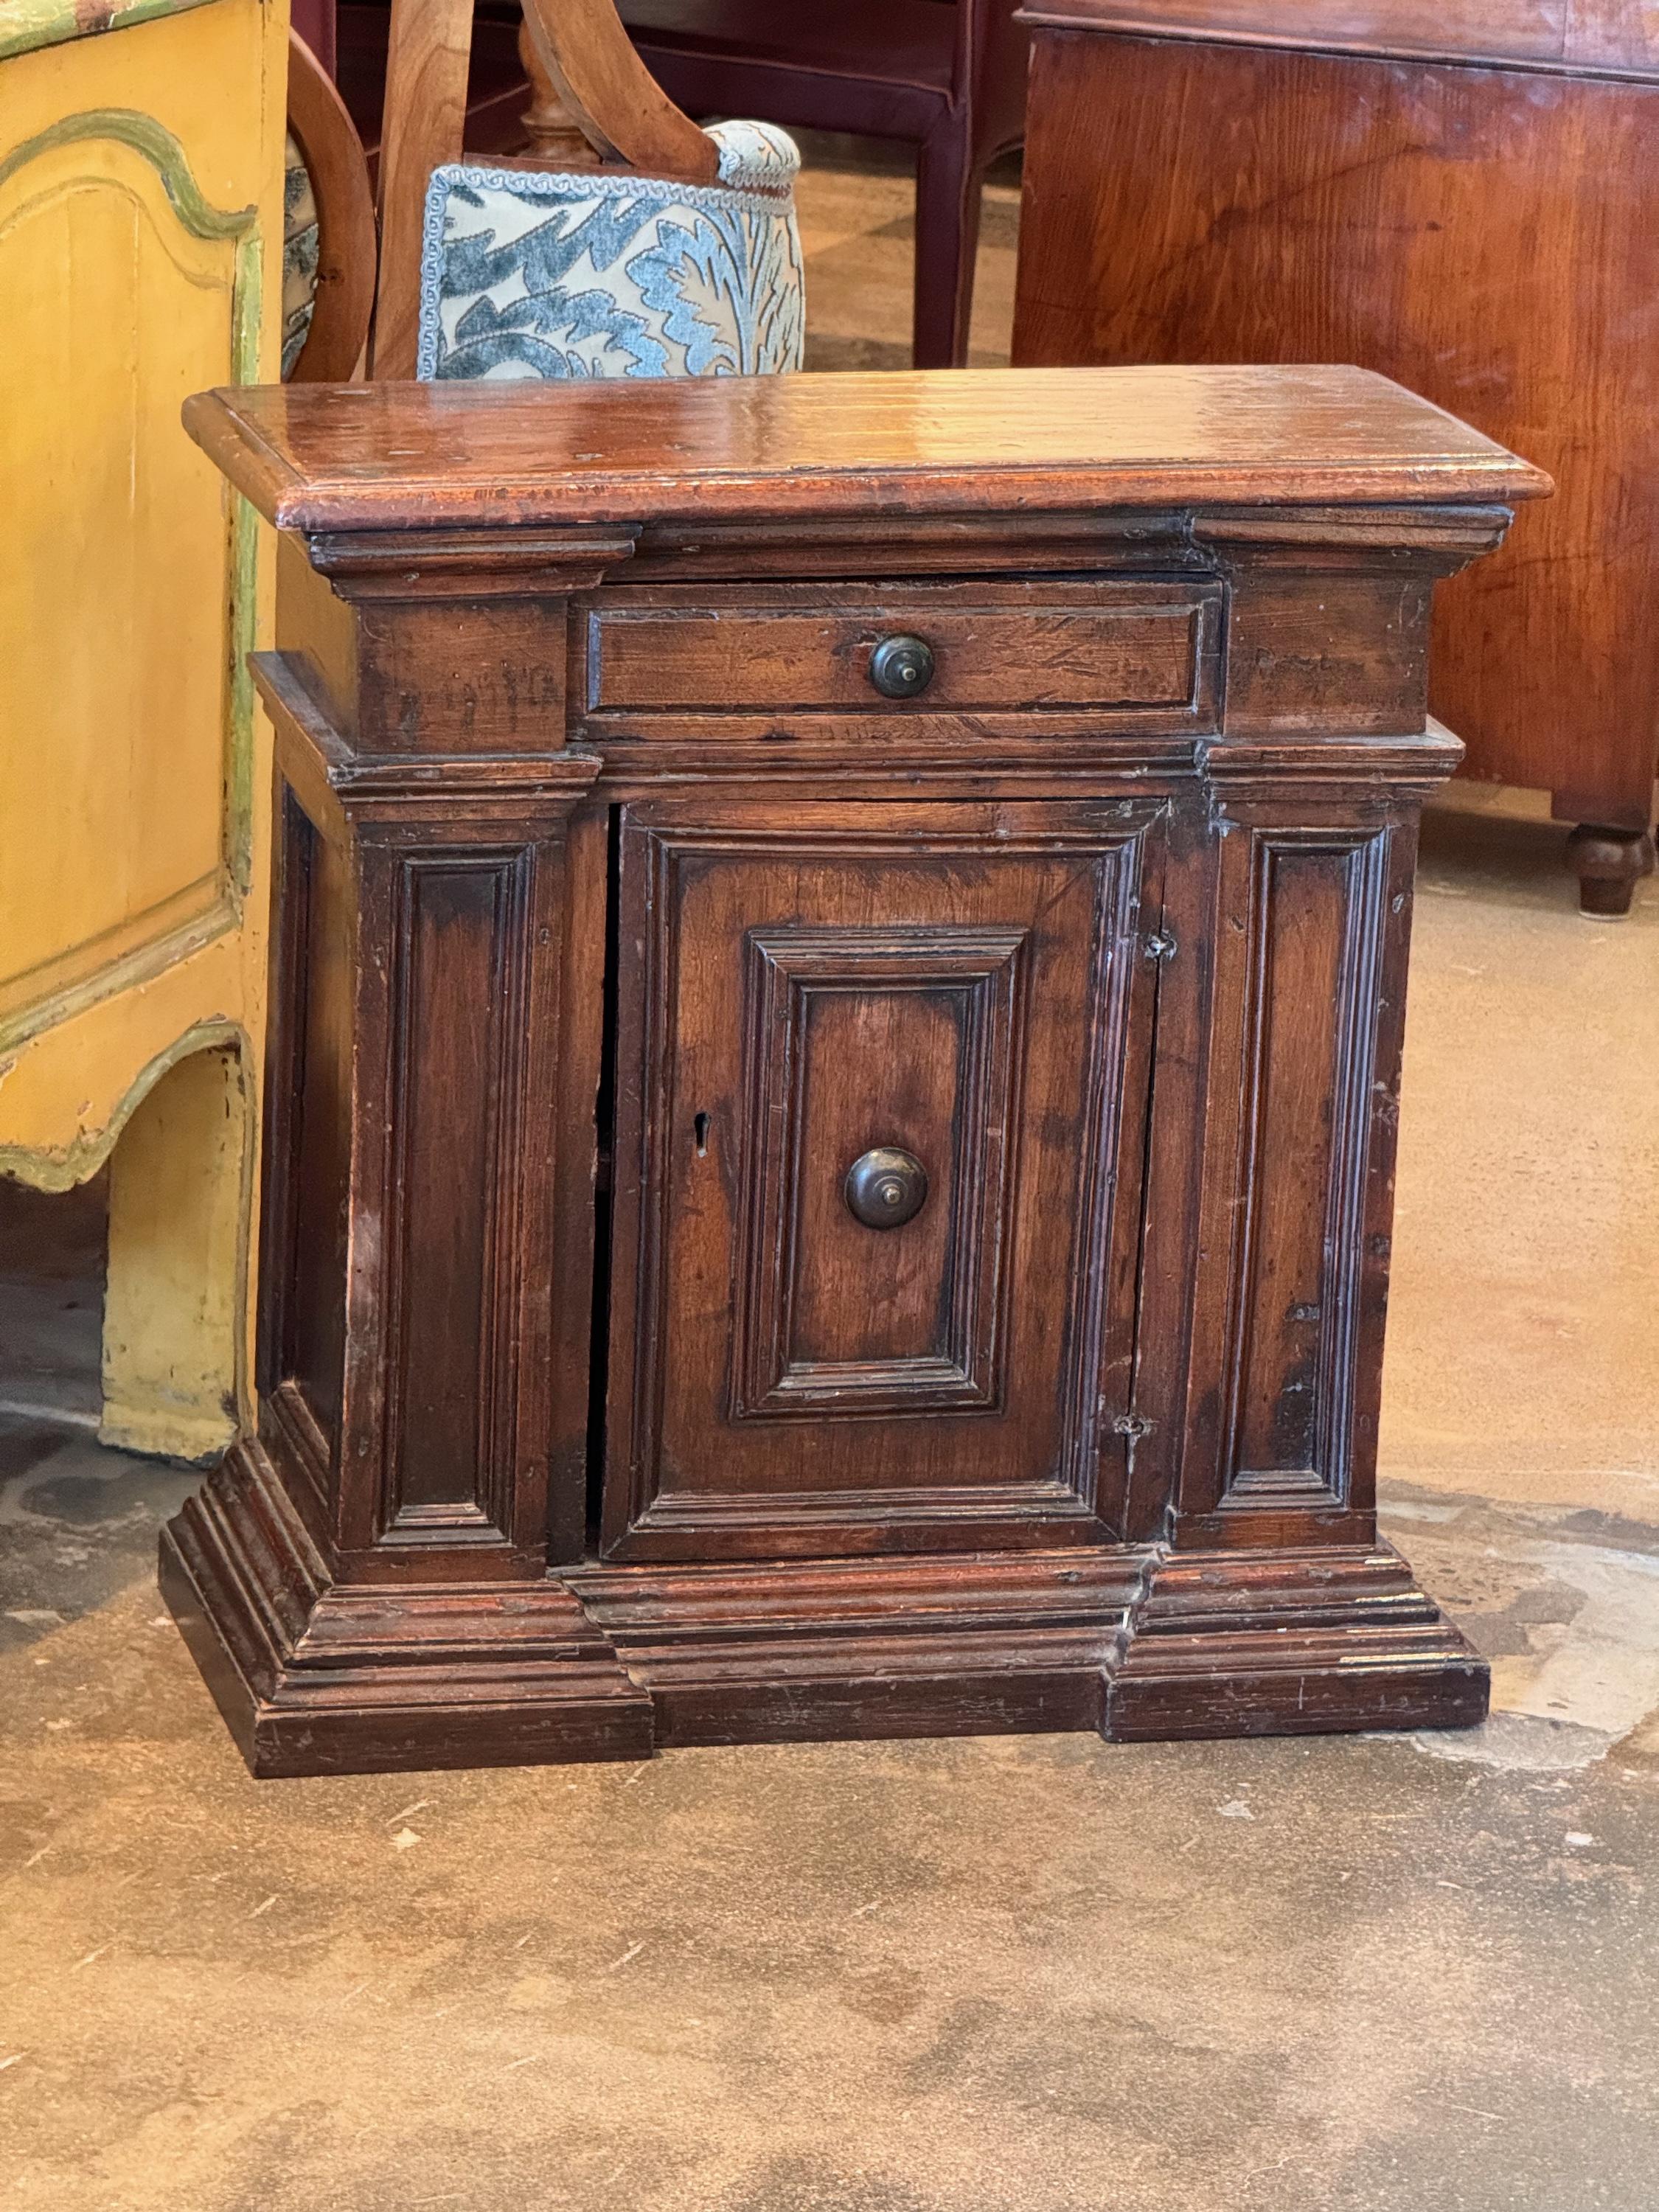 A small Italian cabinet. Nicely carved.